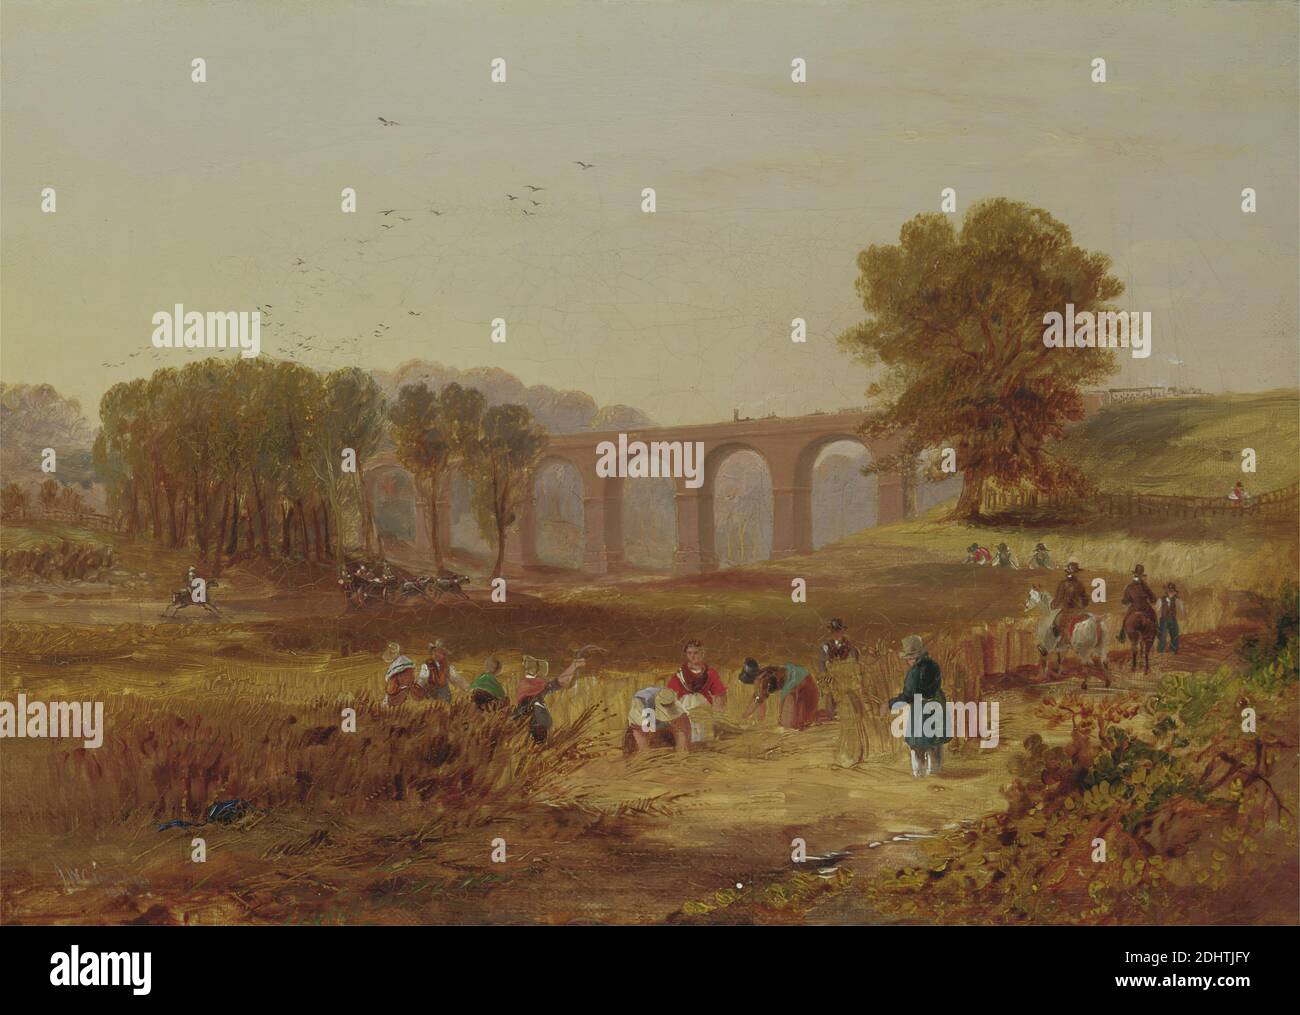 Corby Viaduct, the Newcastle and Carlisle Railway, John Wilson Carmichael, 1799–1868, British, 1836, Oil on canvas, Support (PTG): 8 x 12 inches (20.3 x 30.5 cm), apron (main garment), arches, architecture, bonnets, cape, corn, equestrians, farming, farmland, fields (agricultural land), genre subject, horses (animals), laborers, landscape, poke bonnet, railroad, railway, road, tracks, train, viaduct, workers, Cumbria, England, United Kingdom, Wetheral Stock Photo